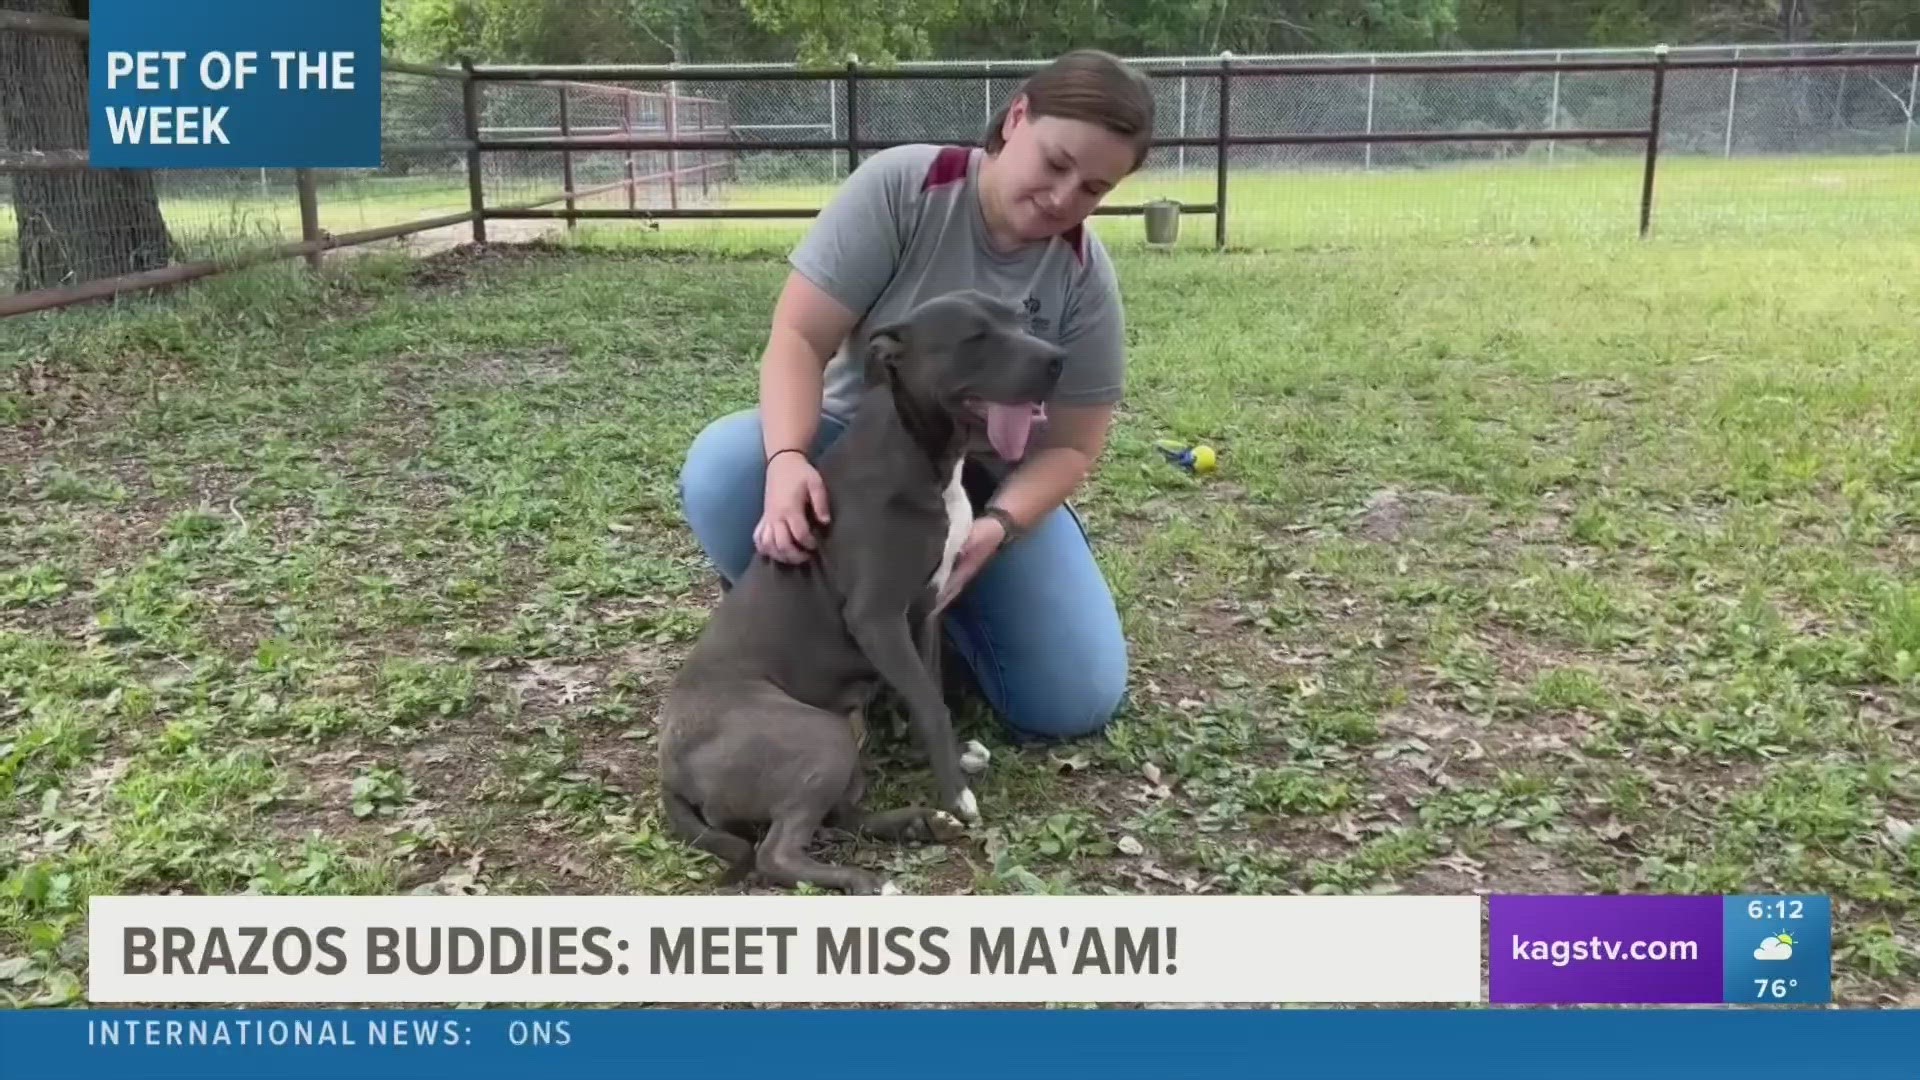 This week's Brazos Buddy is Miss Ma'am, a two-and-a-half-year-old Pit Bull mix that's looking to be adopted.